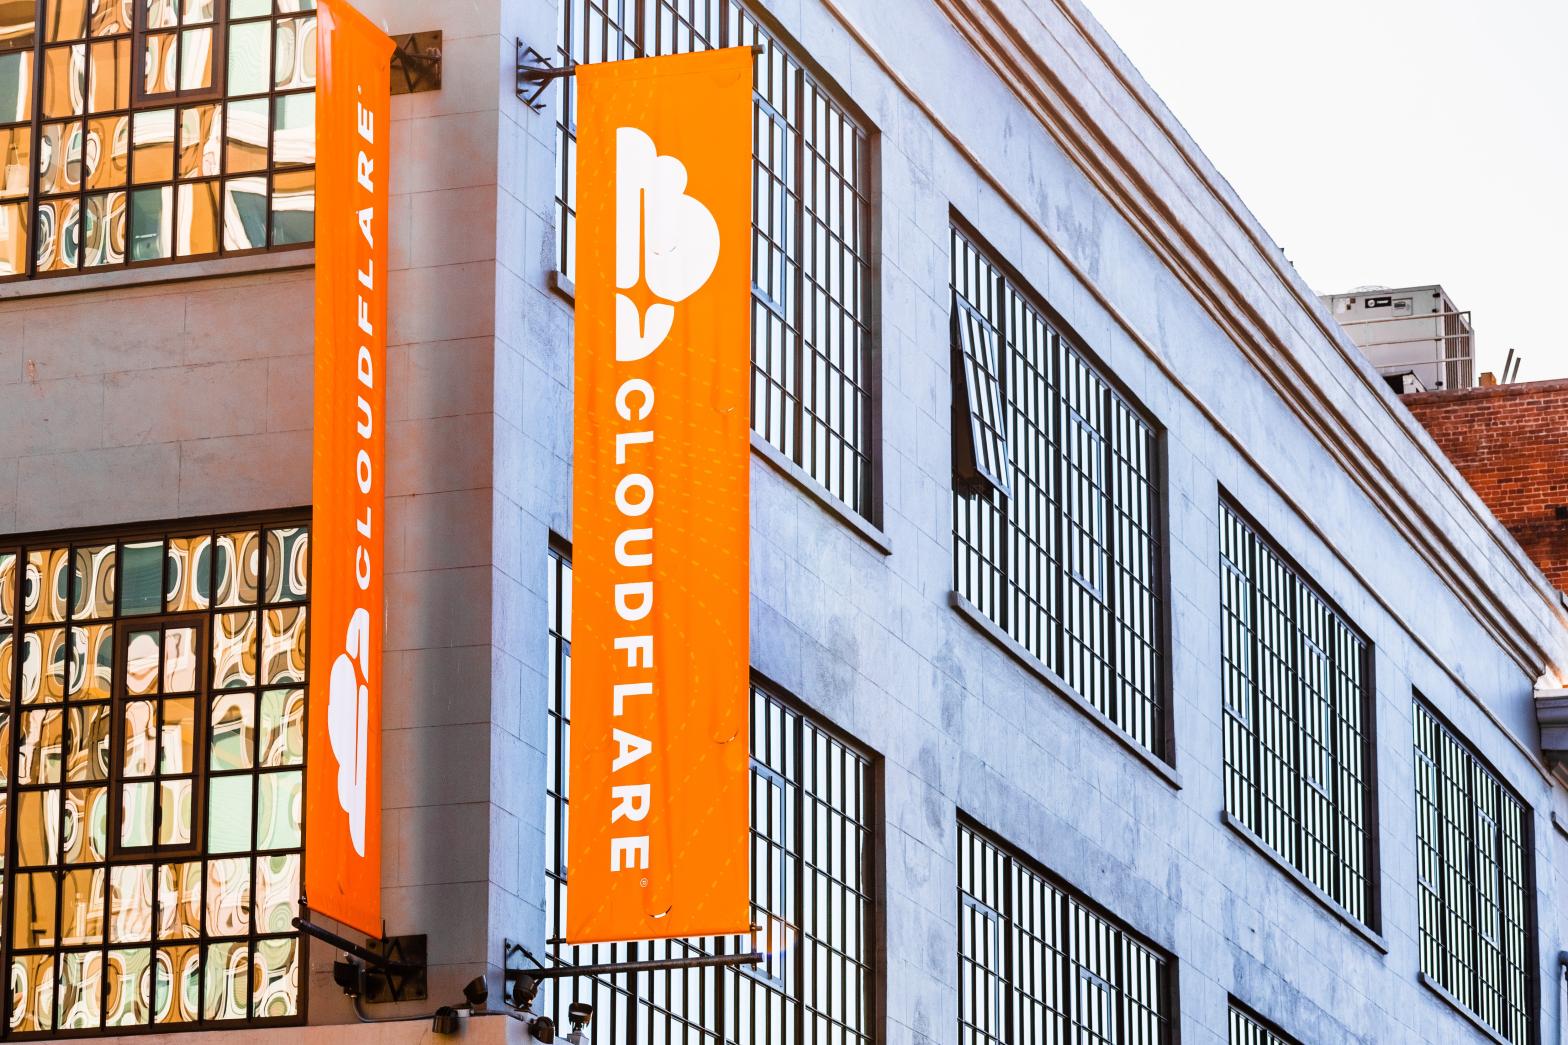 Nov 2, 2019 San Francisco / CA / USA - Exterior view of Cloudflare headquarters; Cloudflare, Inc. is an Ameircan web infrastructure and website security company (Photo: Sundry Photography, Shutterstock)